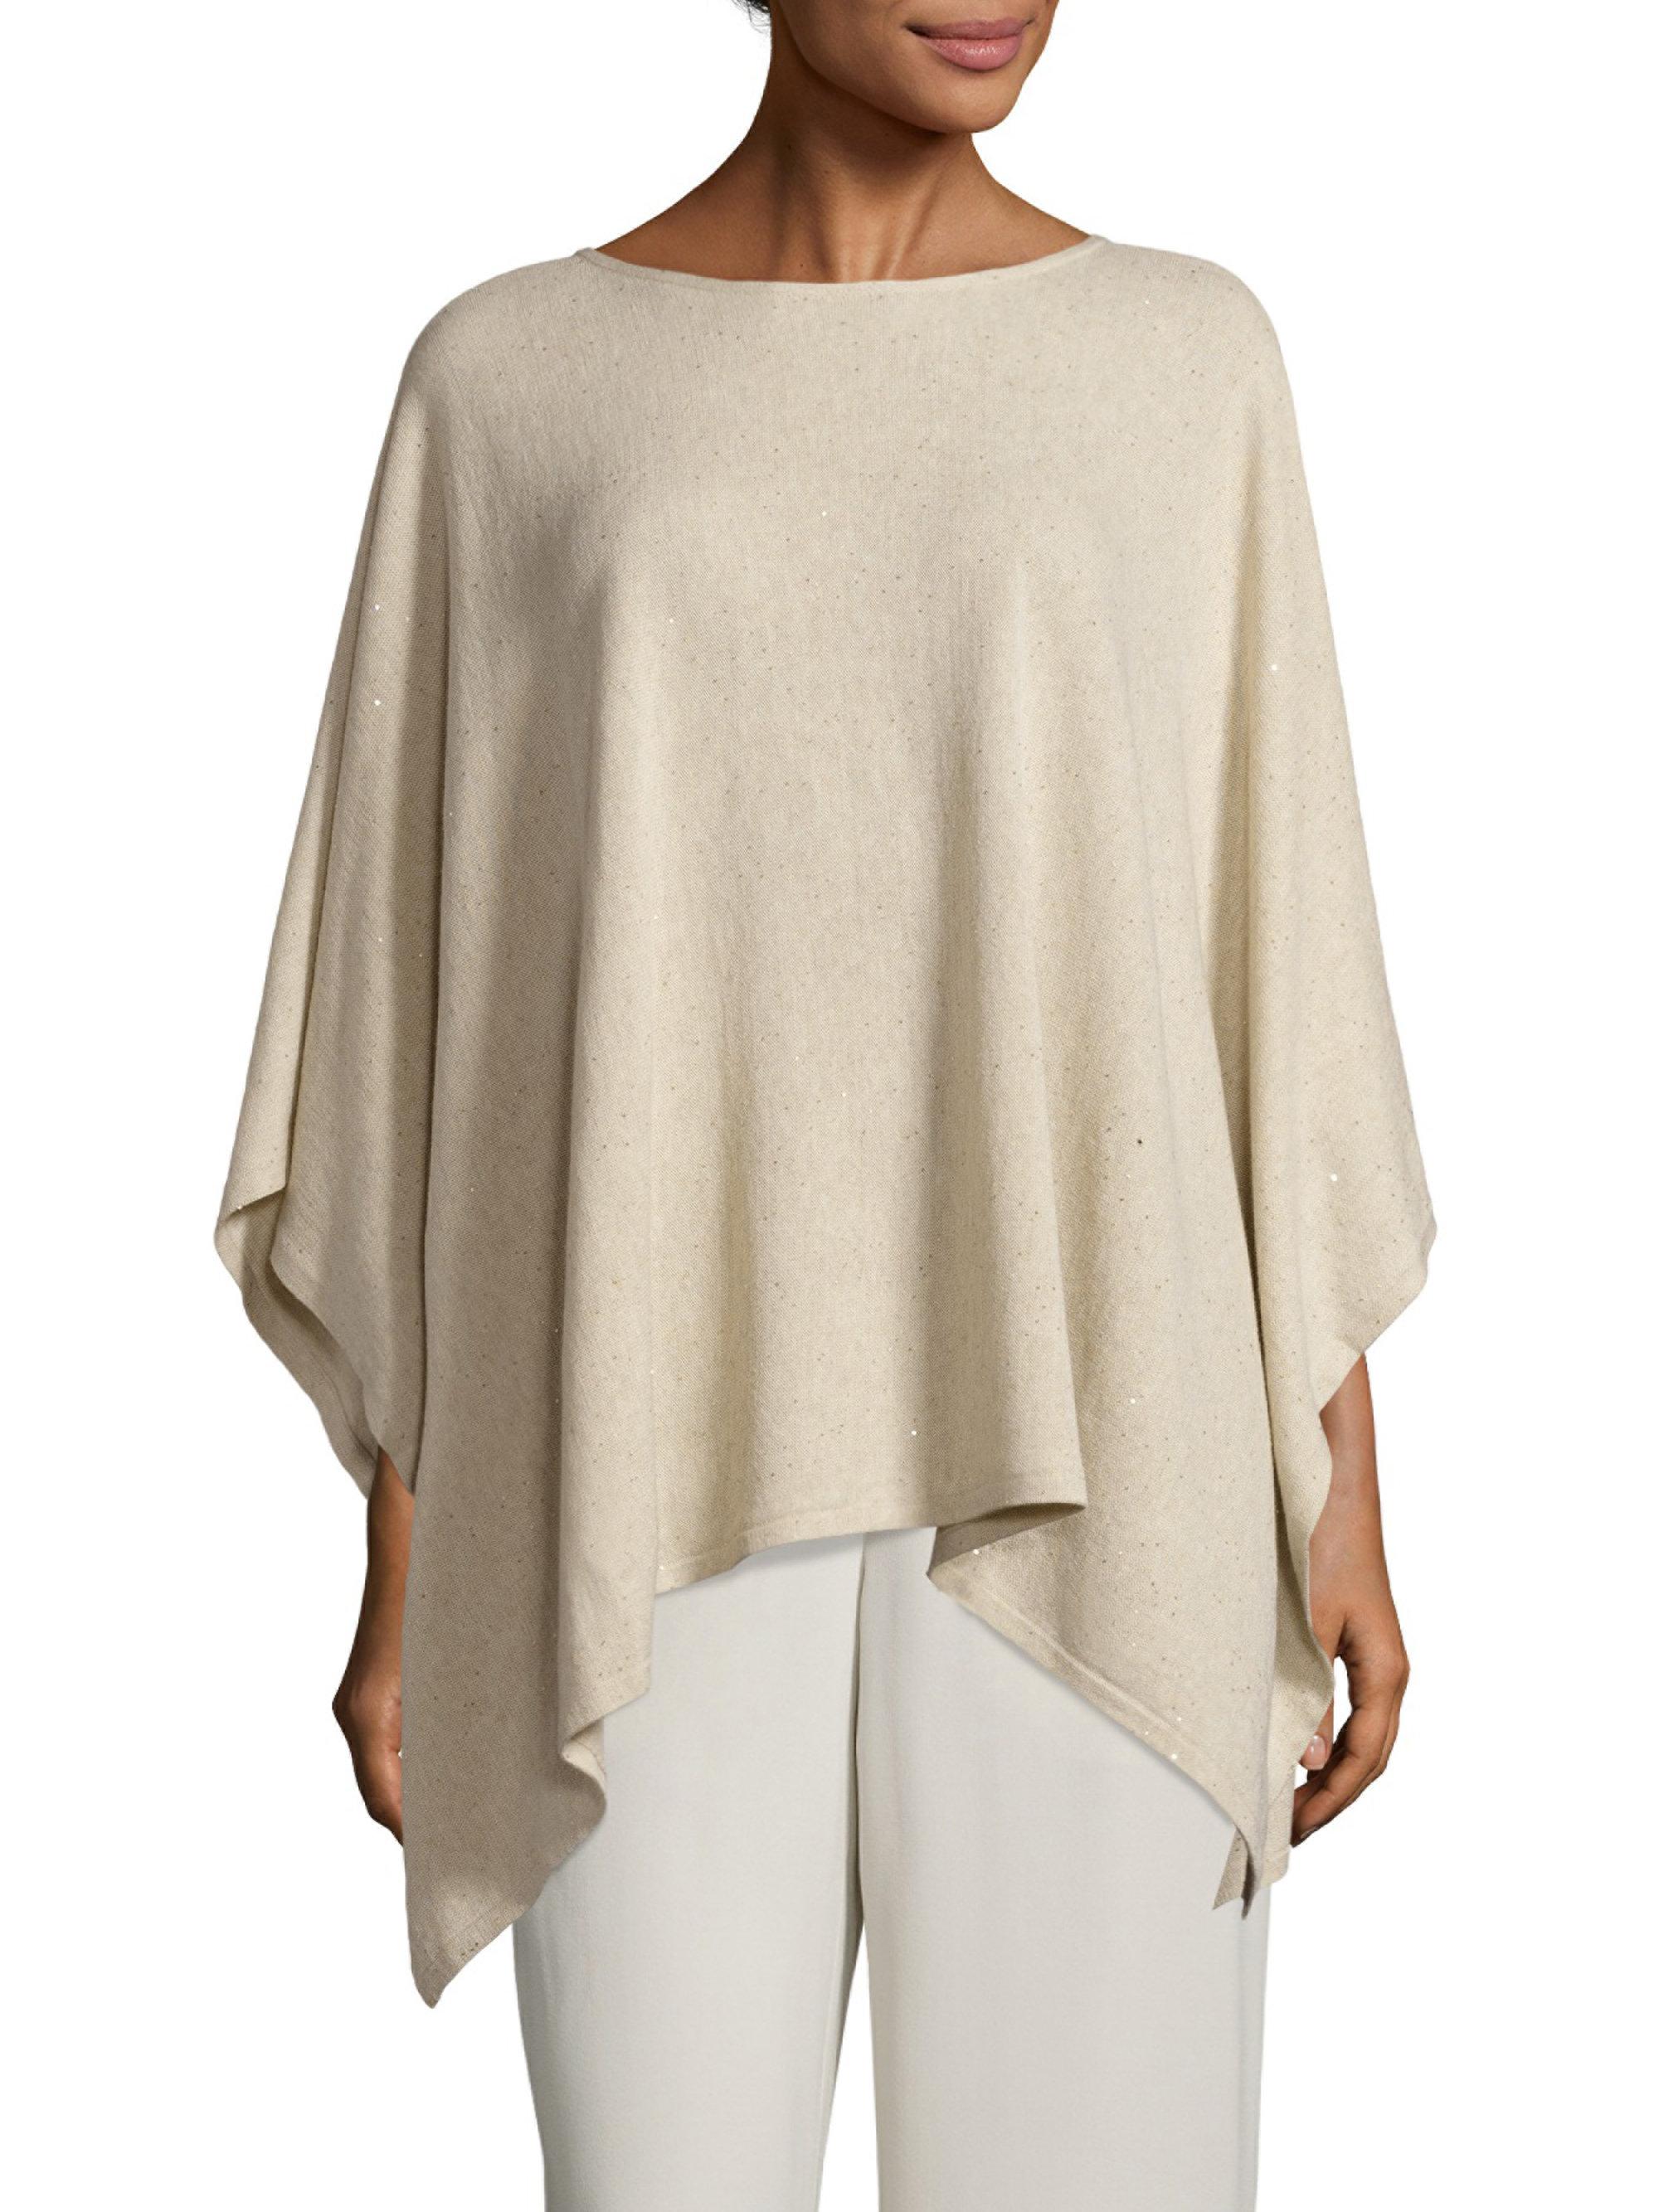 Eileen Fisher Silk Blend Sequin Poncho in Natural - Lyst